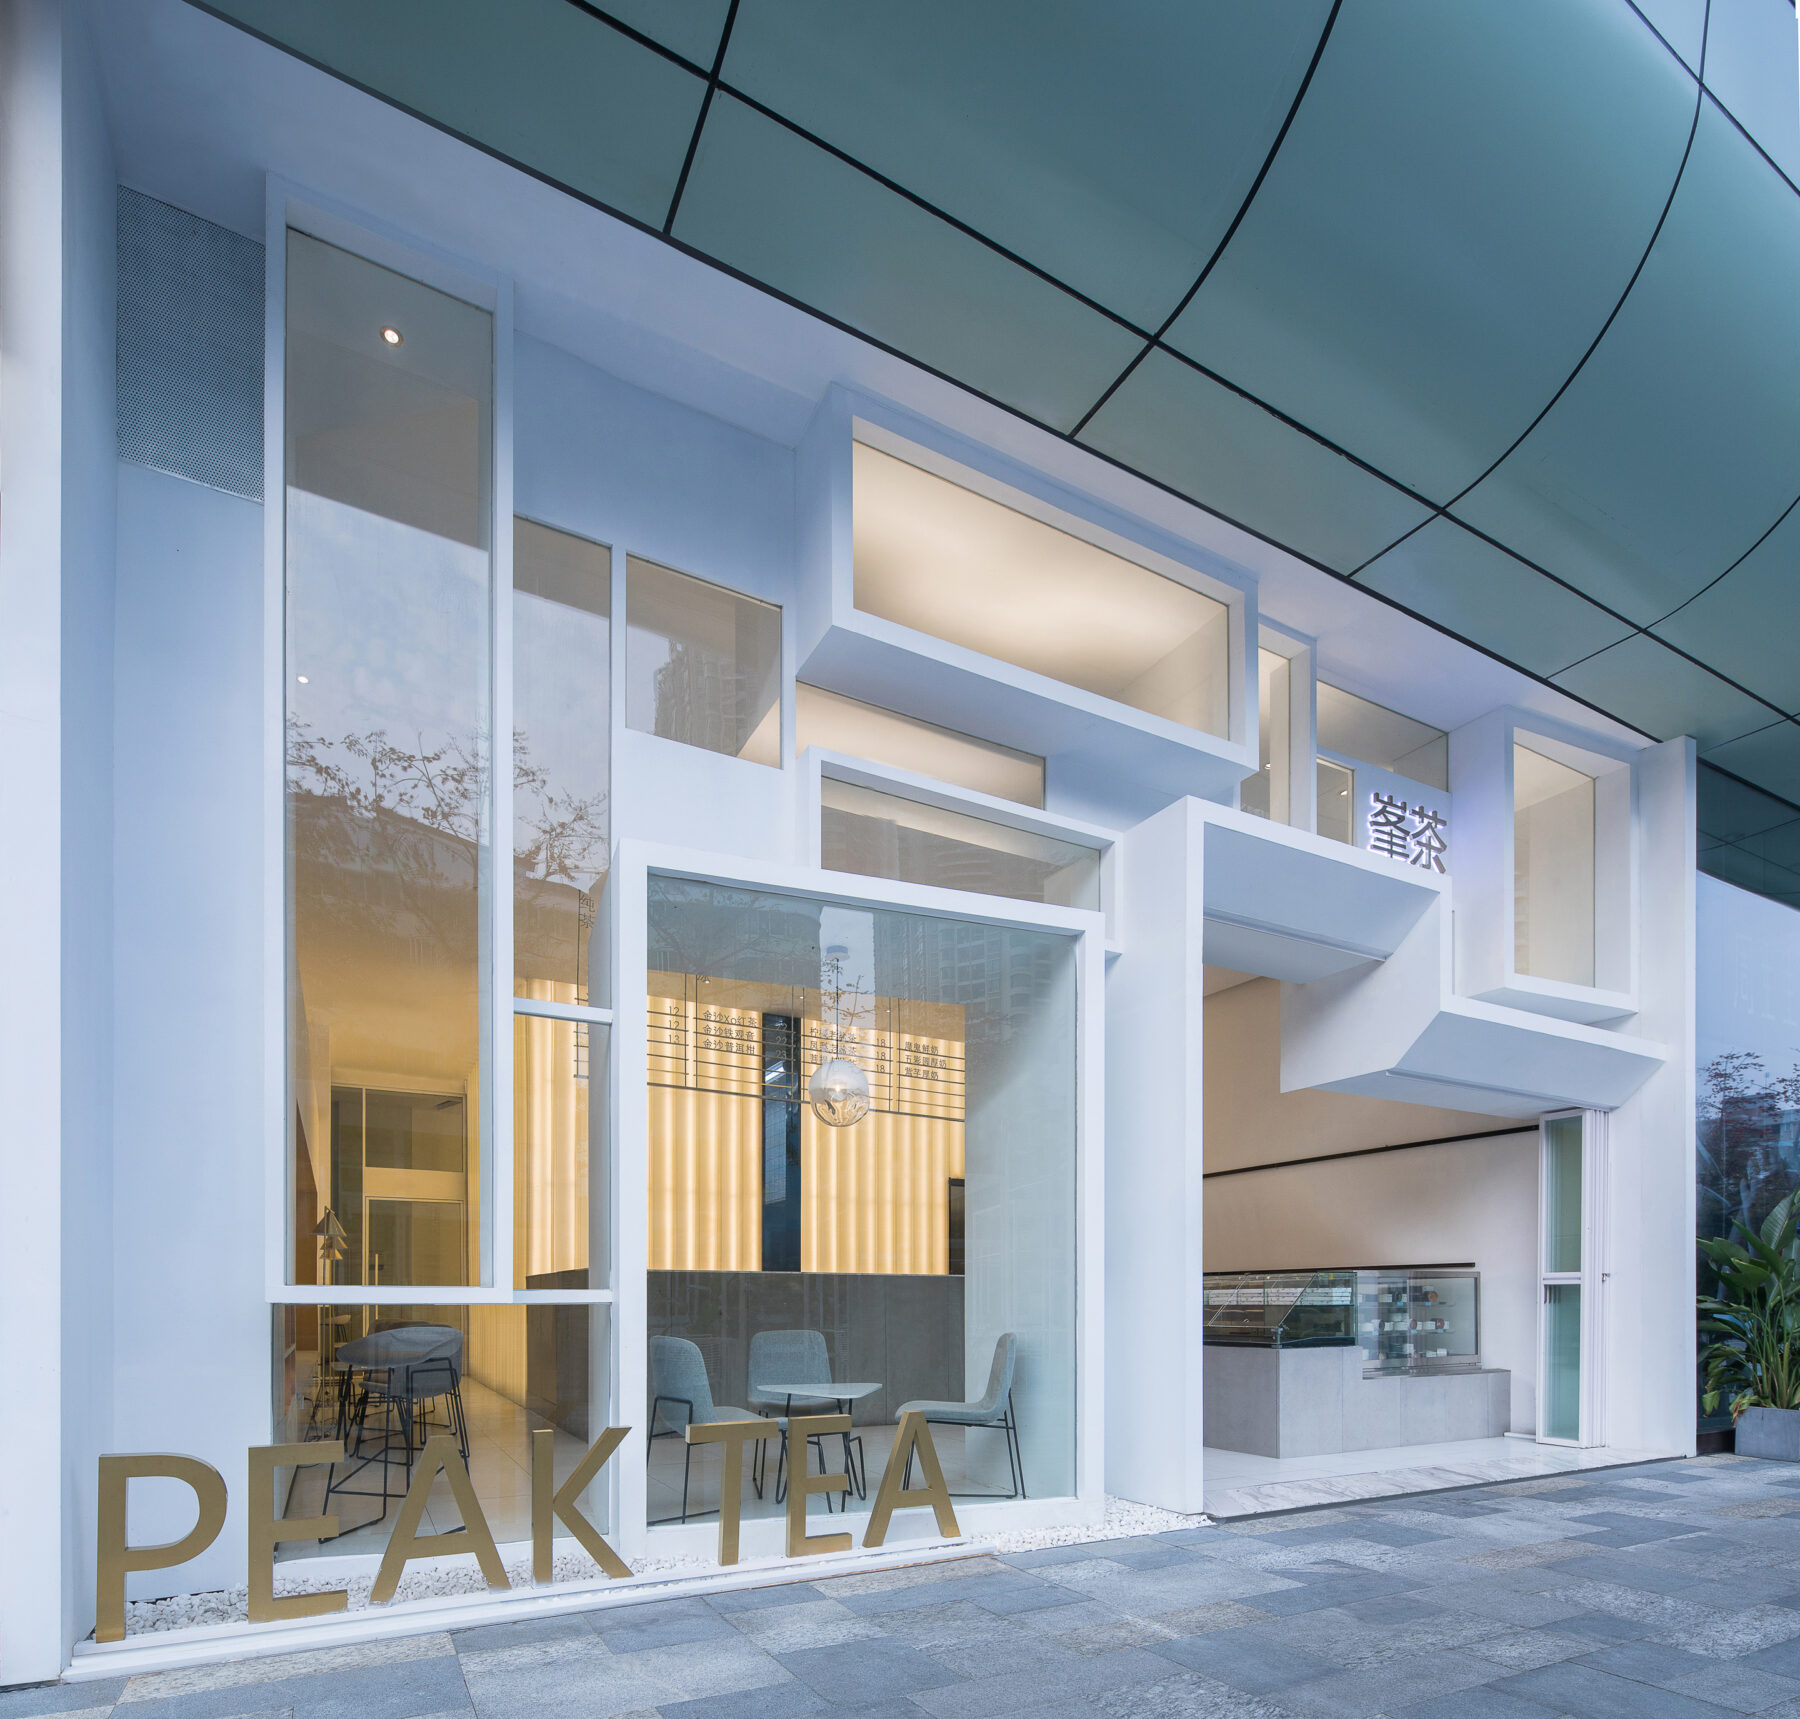 Archisearch Integrated Landscaping: Peak Tea in Shenzhen, China by Onexn Architects